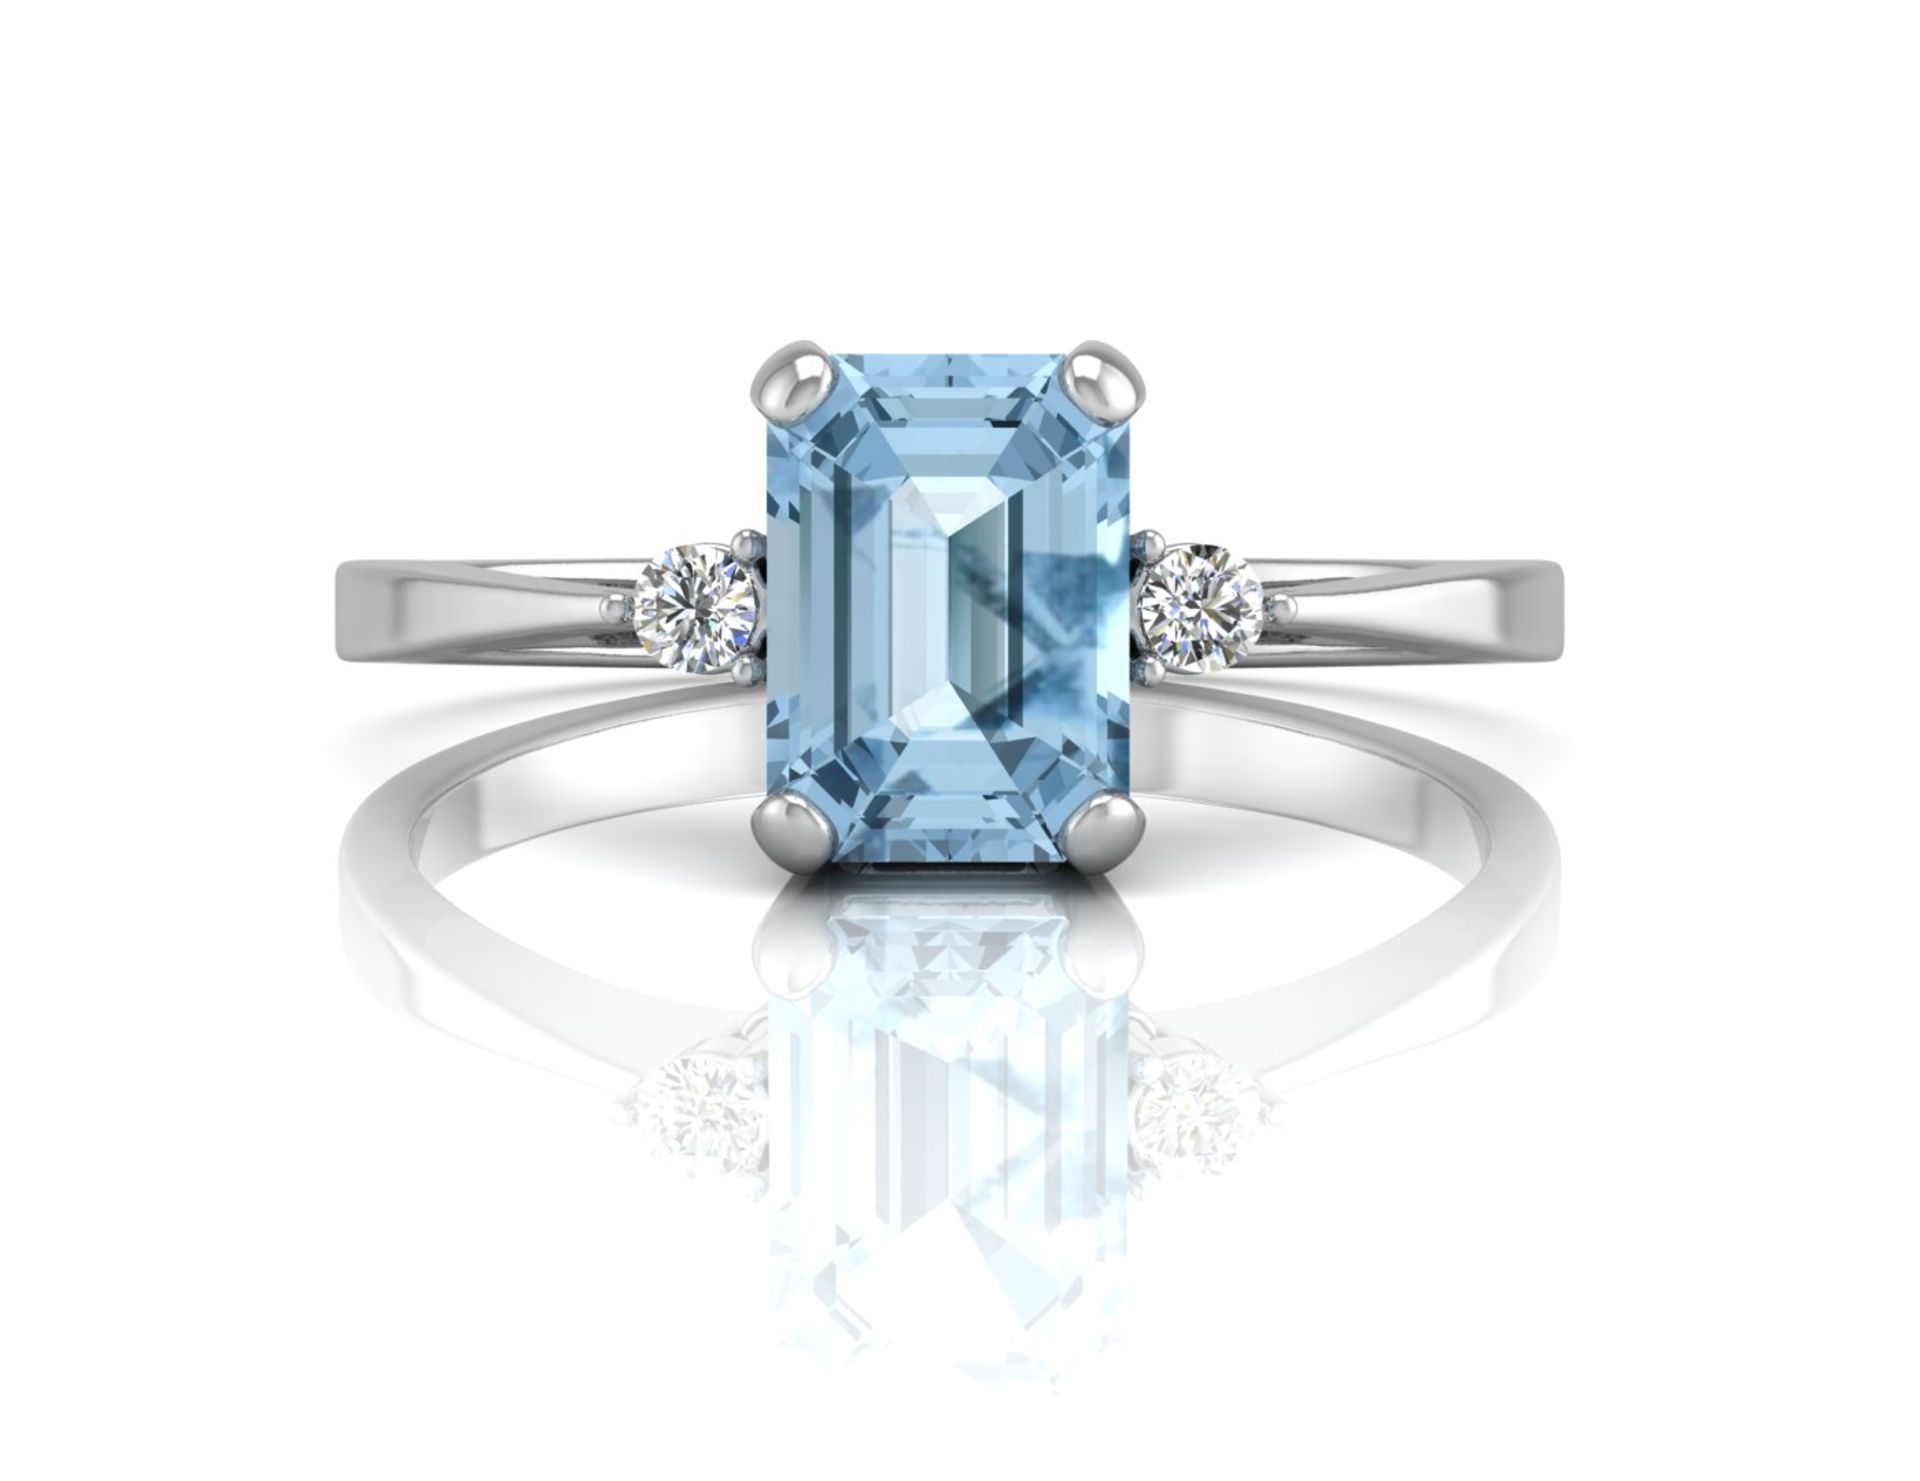 9ct White Gold Diamond And Emerald Cut Blue Topaz Ring 0.04 Carats - Valued by GIE £1,245.00 - An - Image 4 of 5